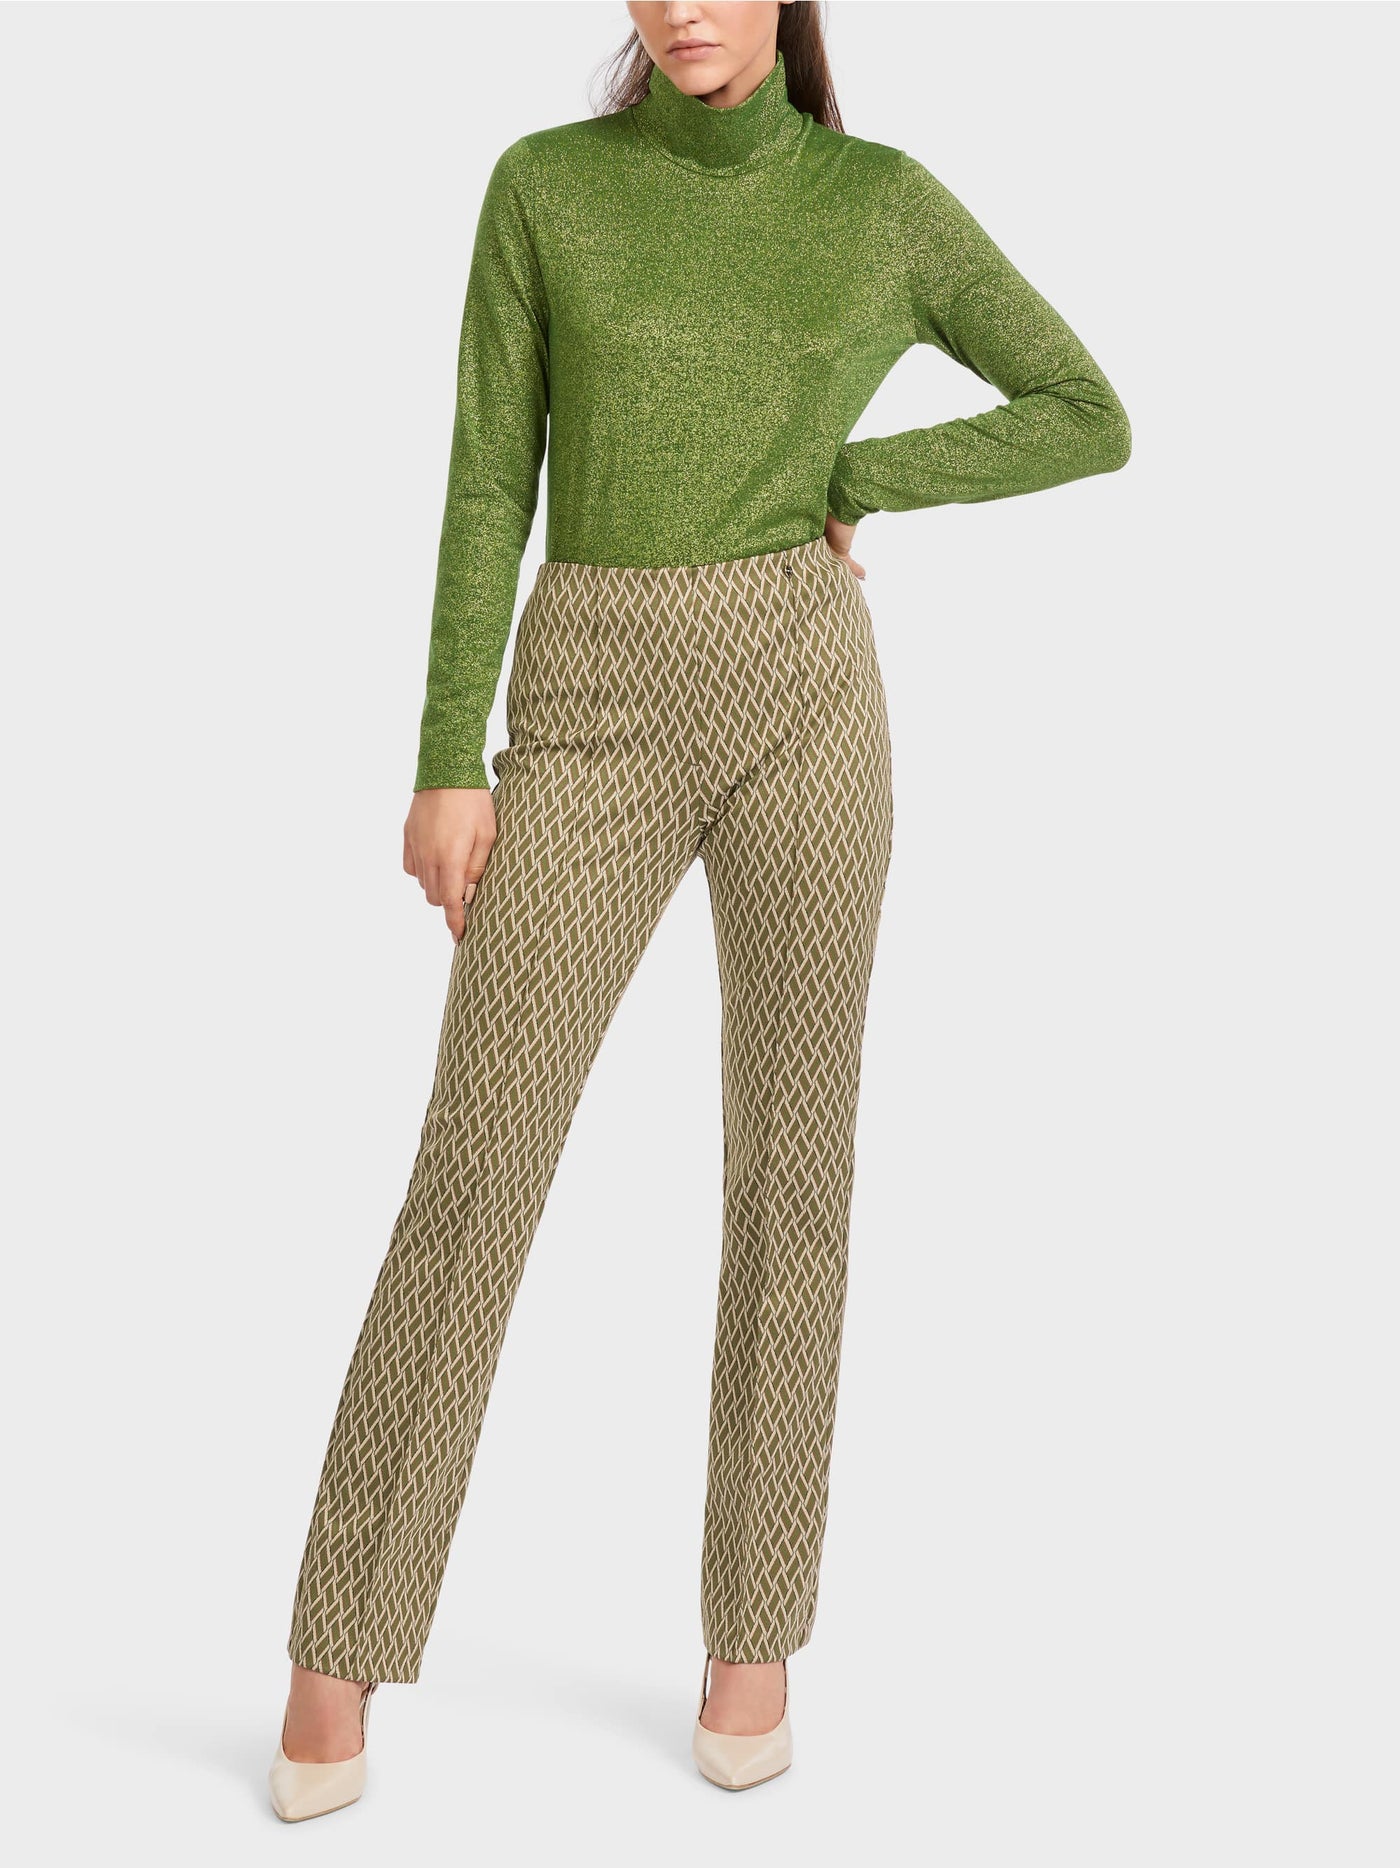 Patterned Frederica Flared Leg Pants - Green